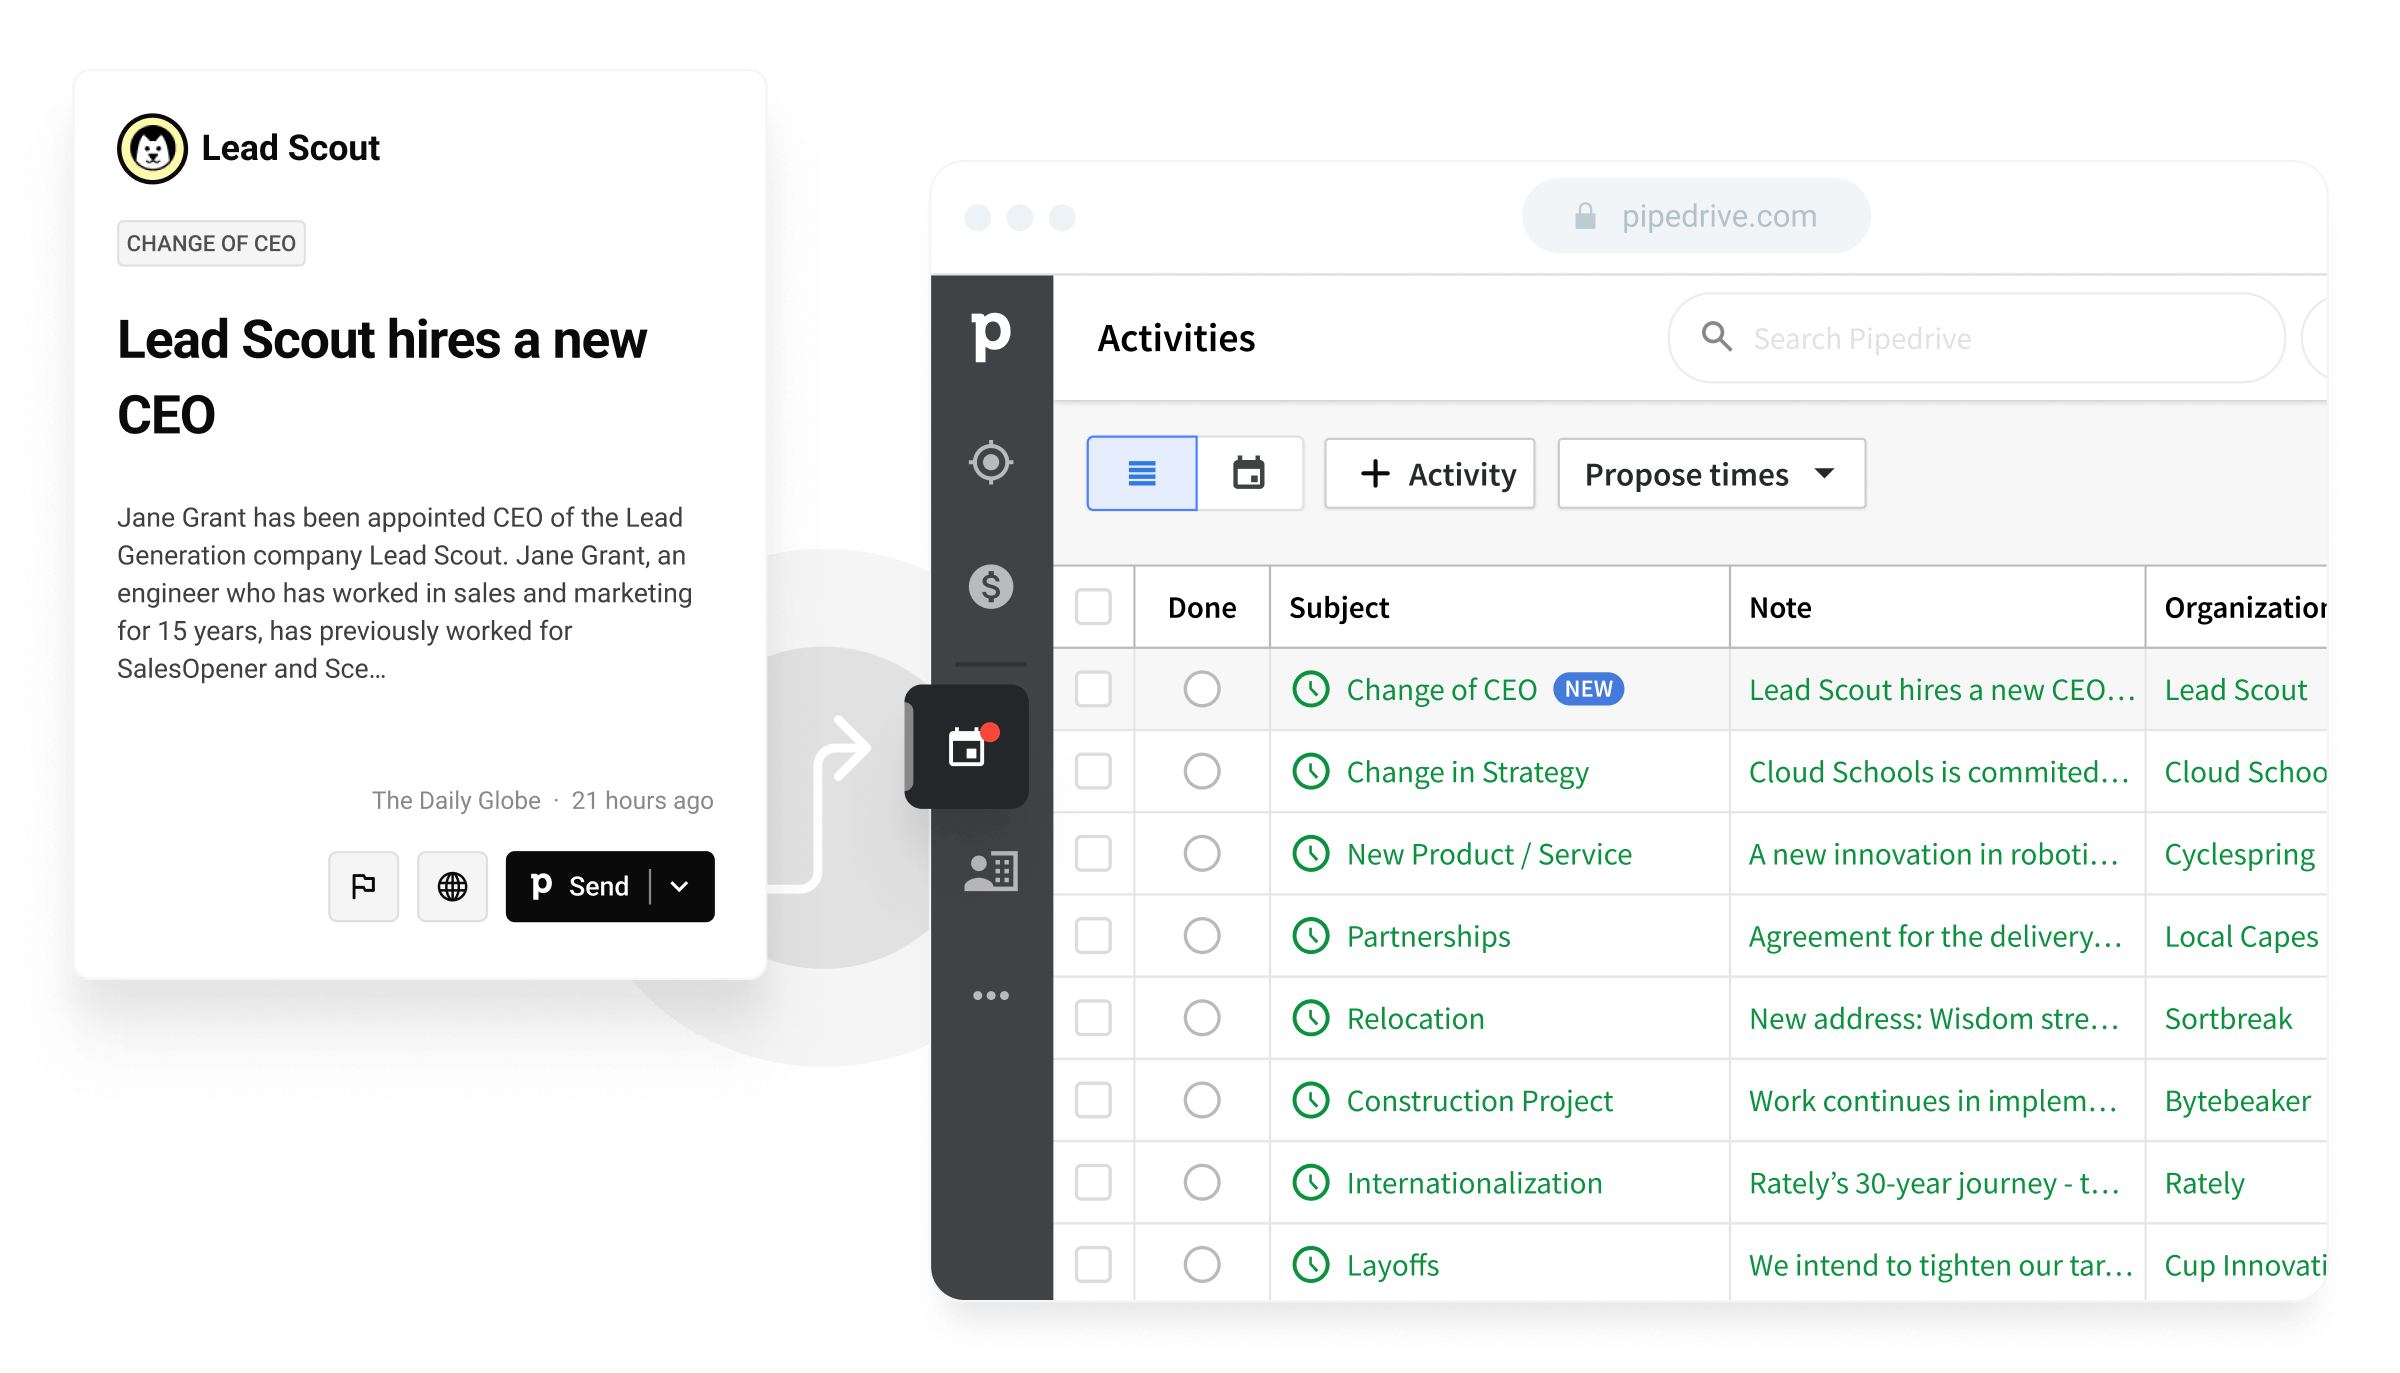 Trigger events in Pipedrive